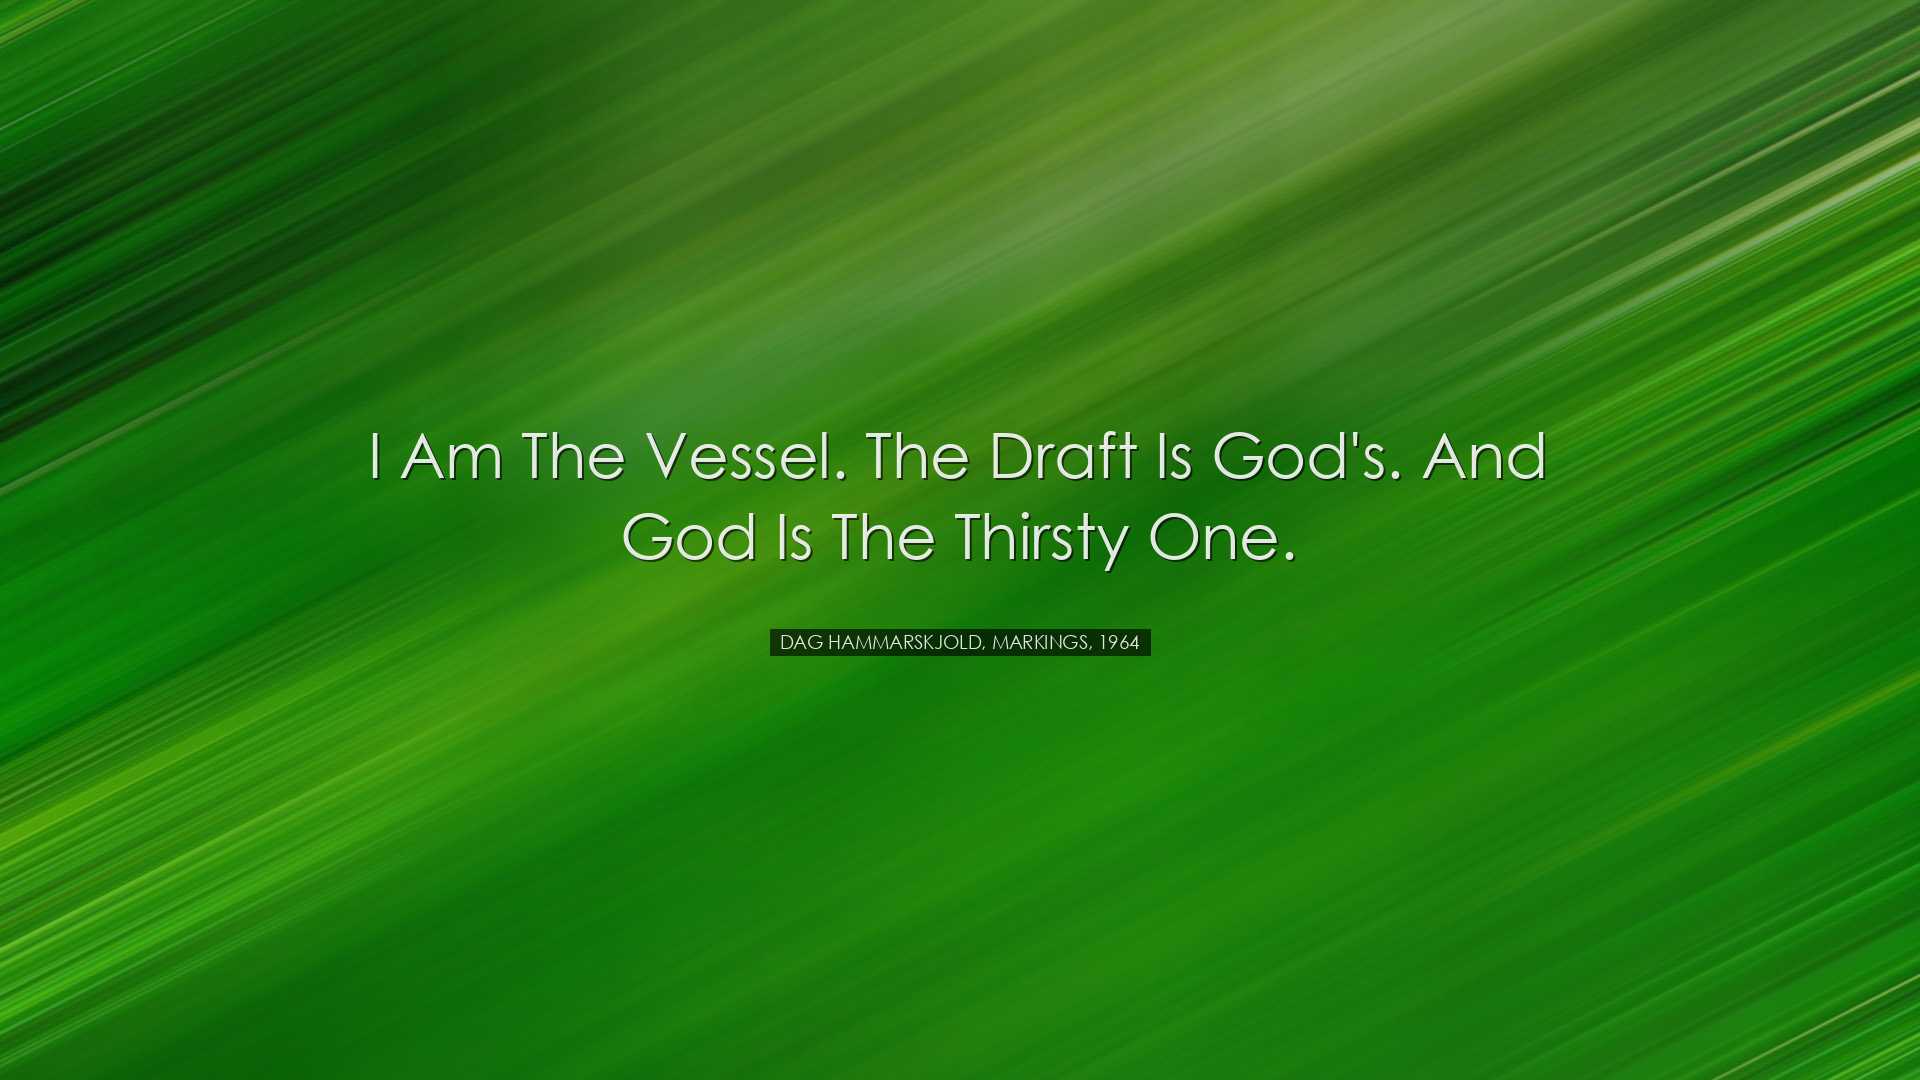 I am the vessel. The draft is God's. And God is the thirsty one. -